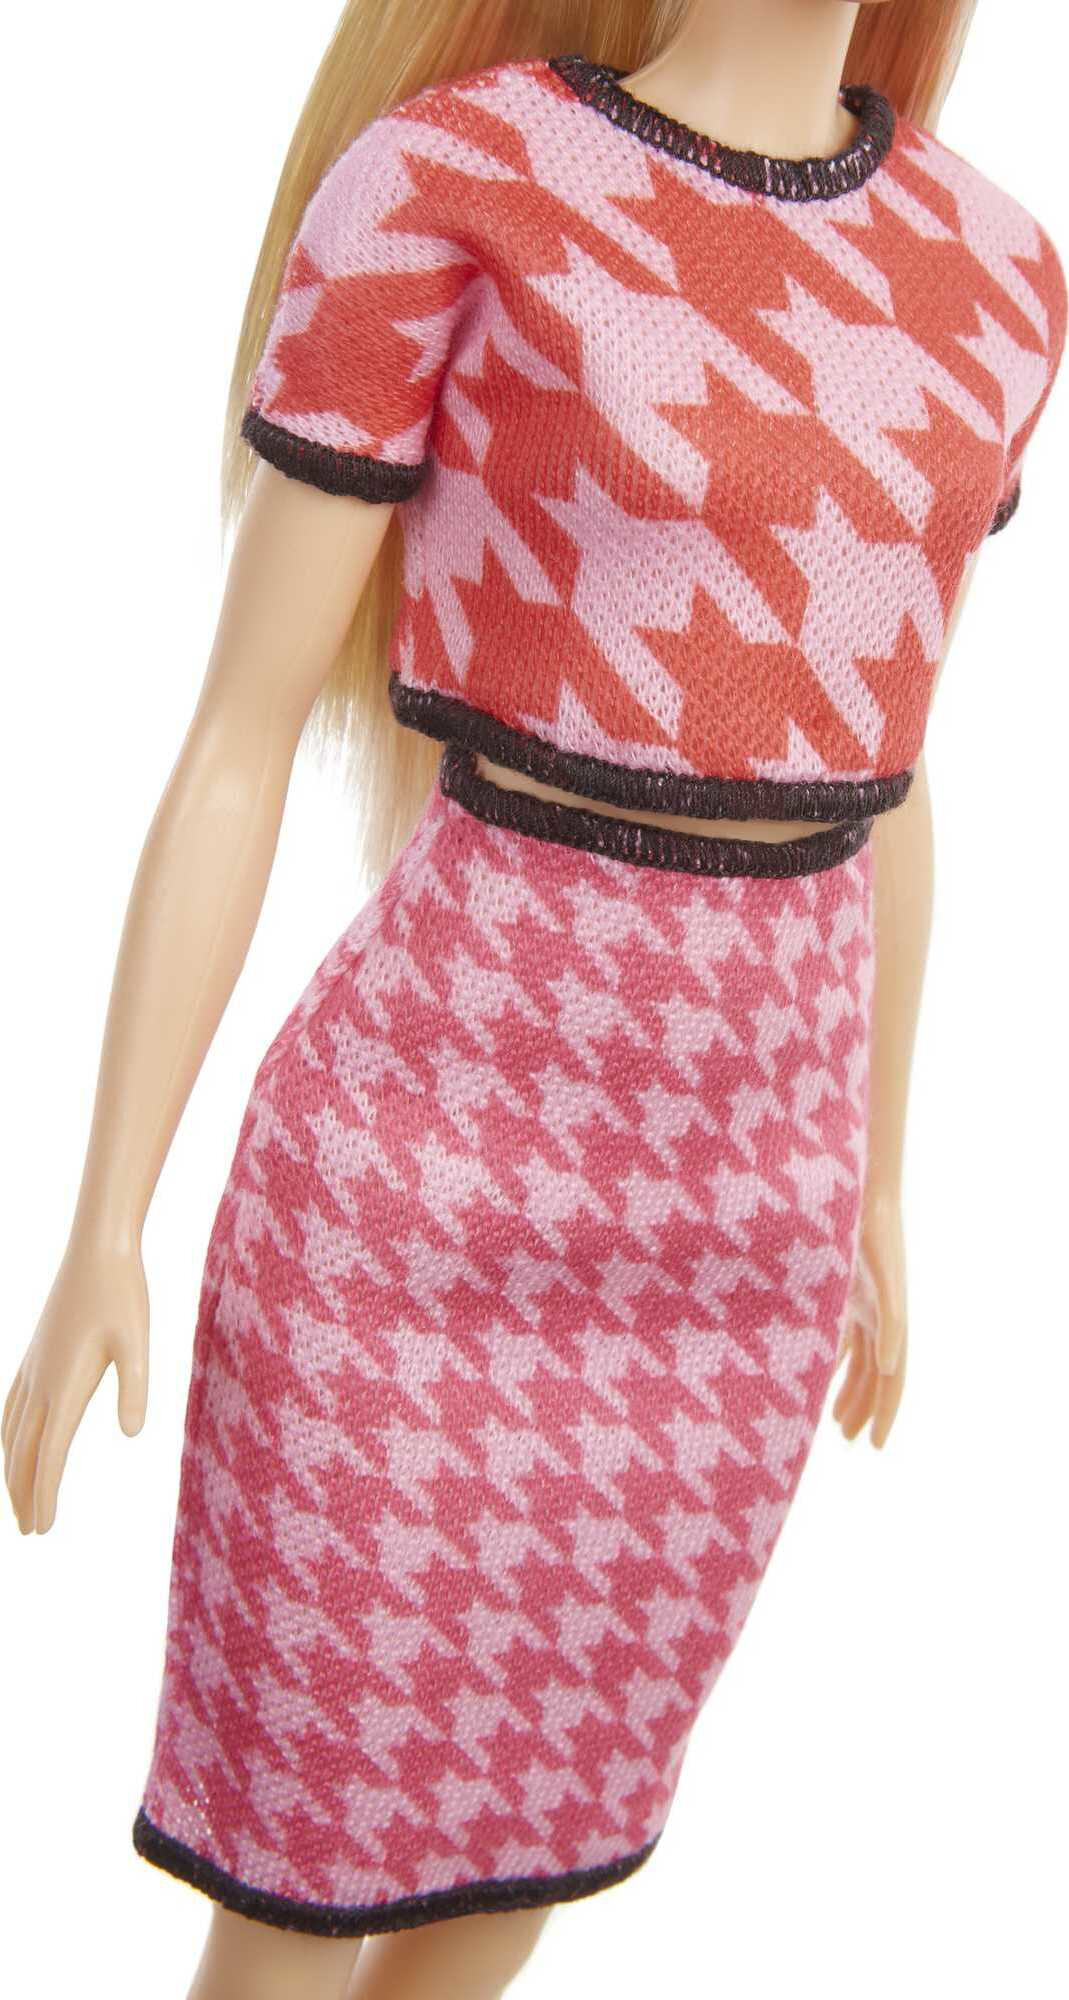 Barbie Fashionistas Doll #169 with Long Blonde Hair in Houndstooth Crop Top & Skirt - image 5 of 7